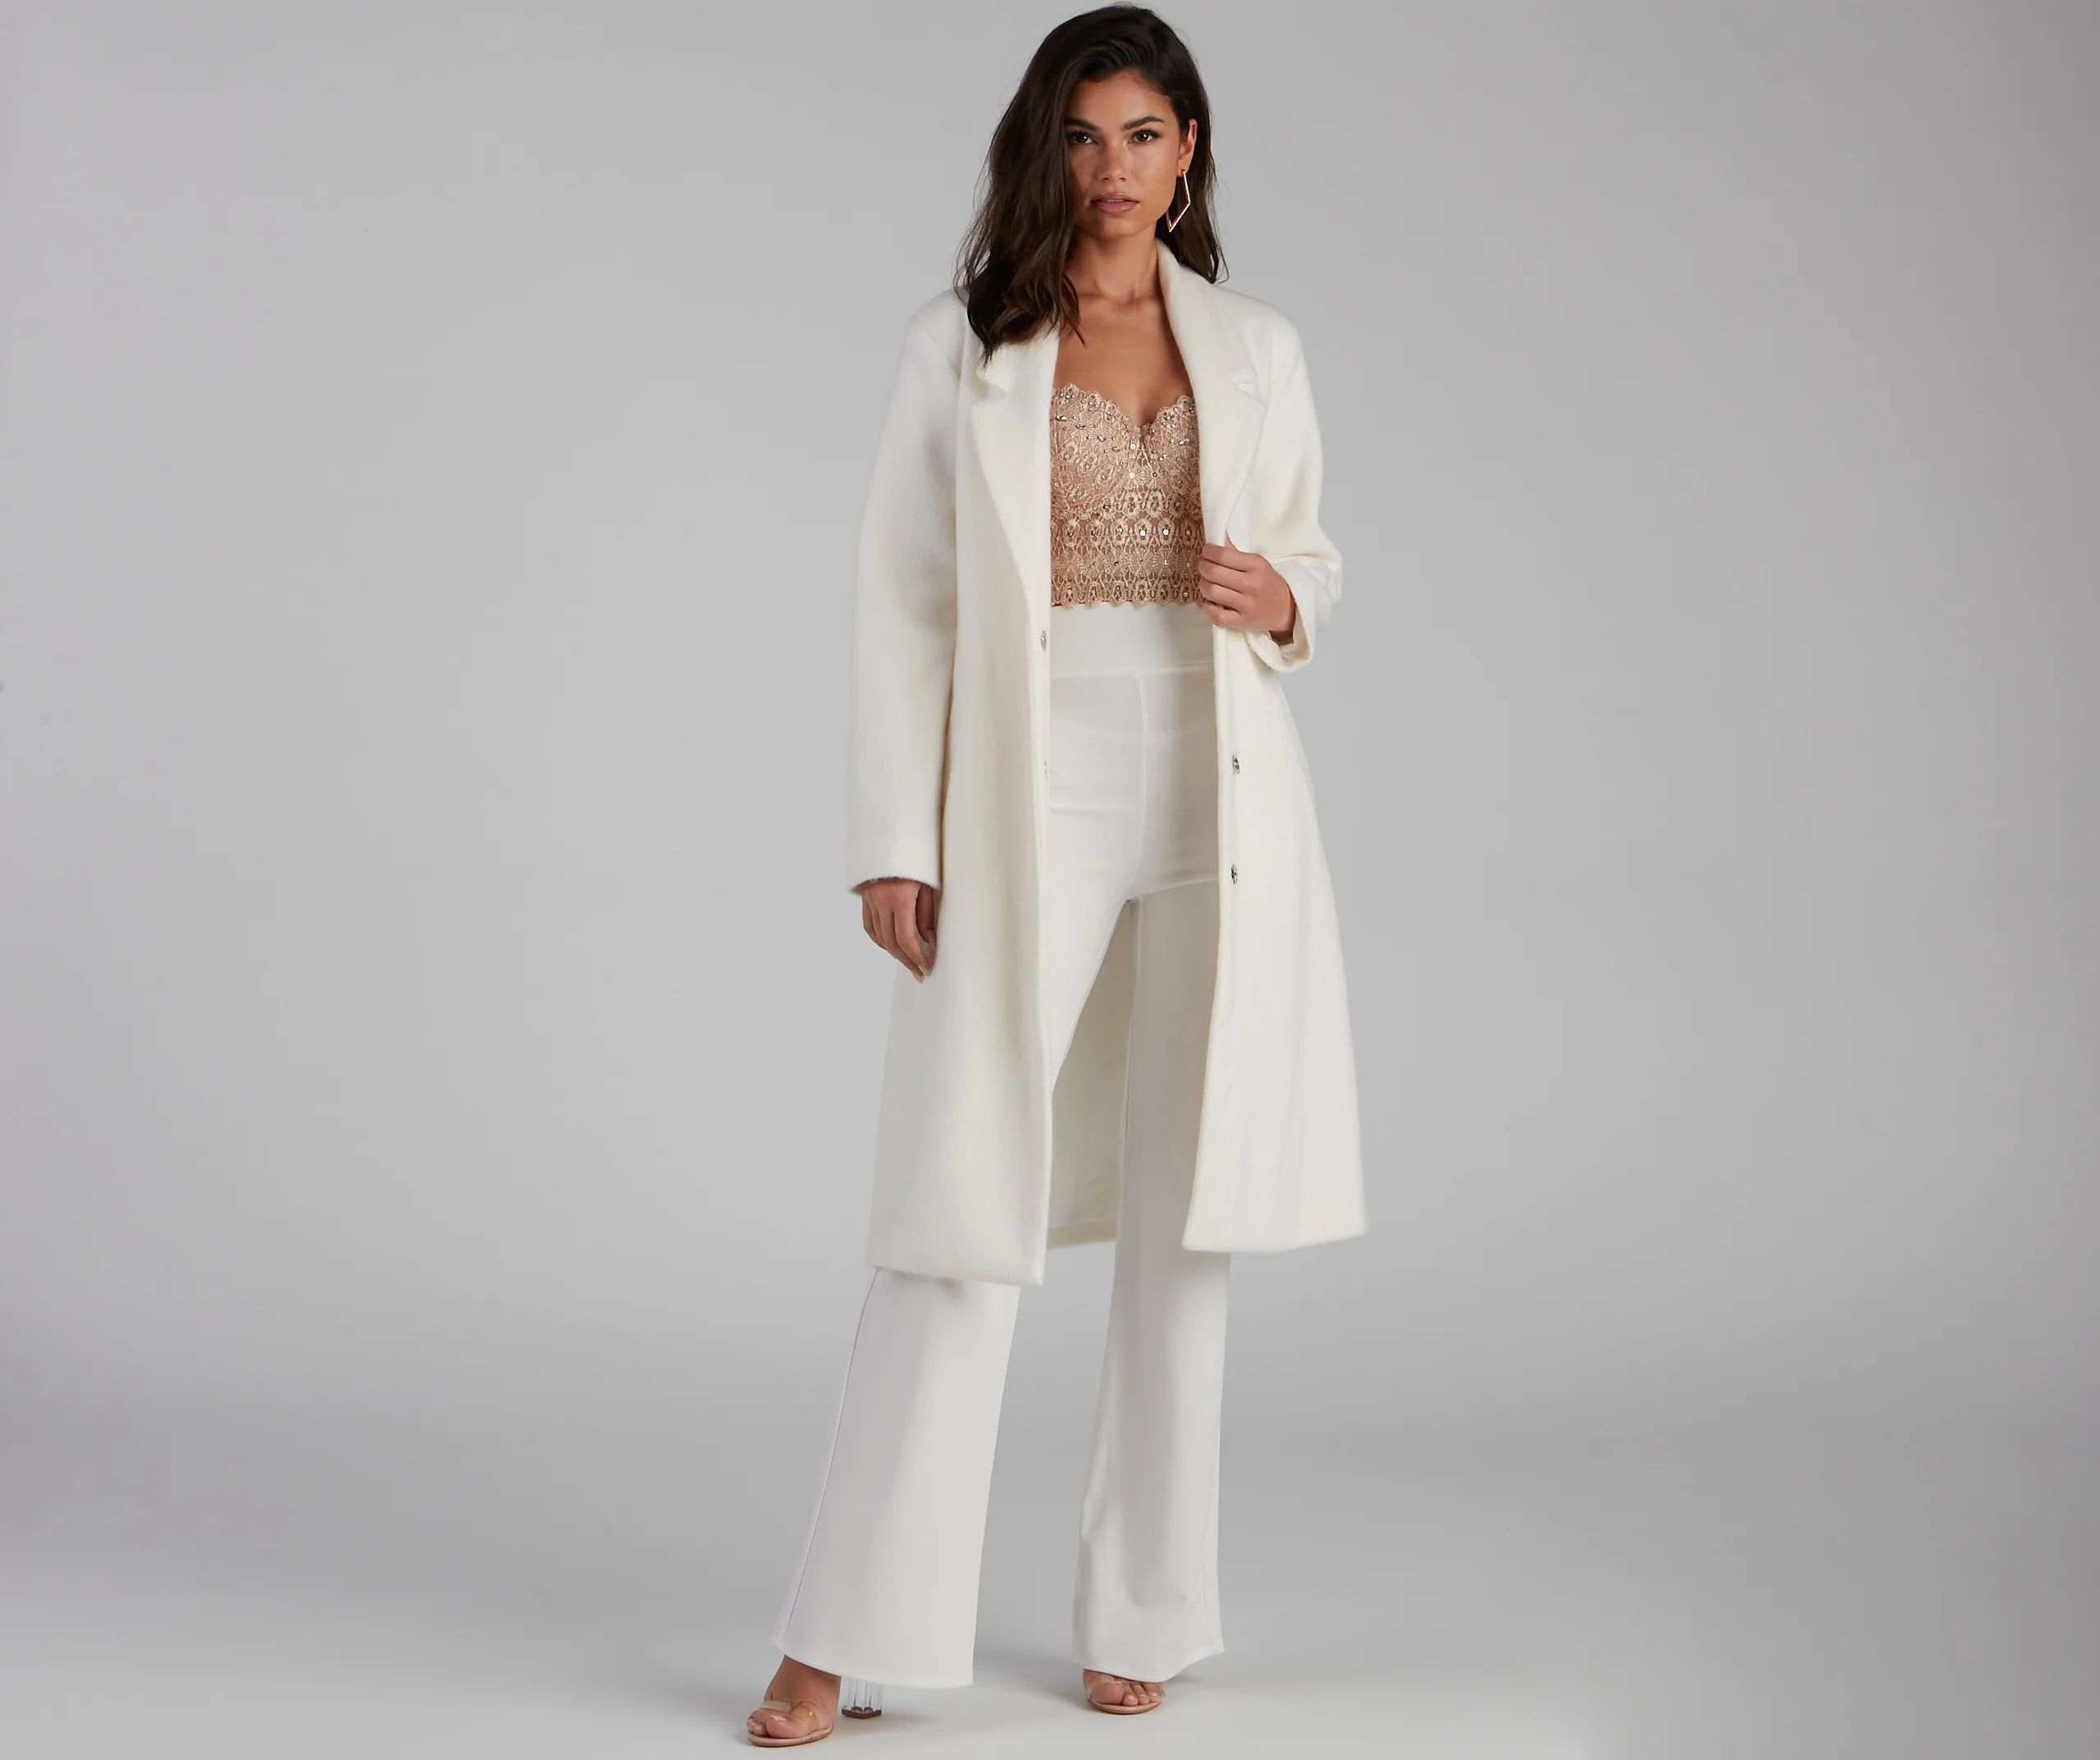 Winter Beauty Wool Trench Coat | Windsor Stores